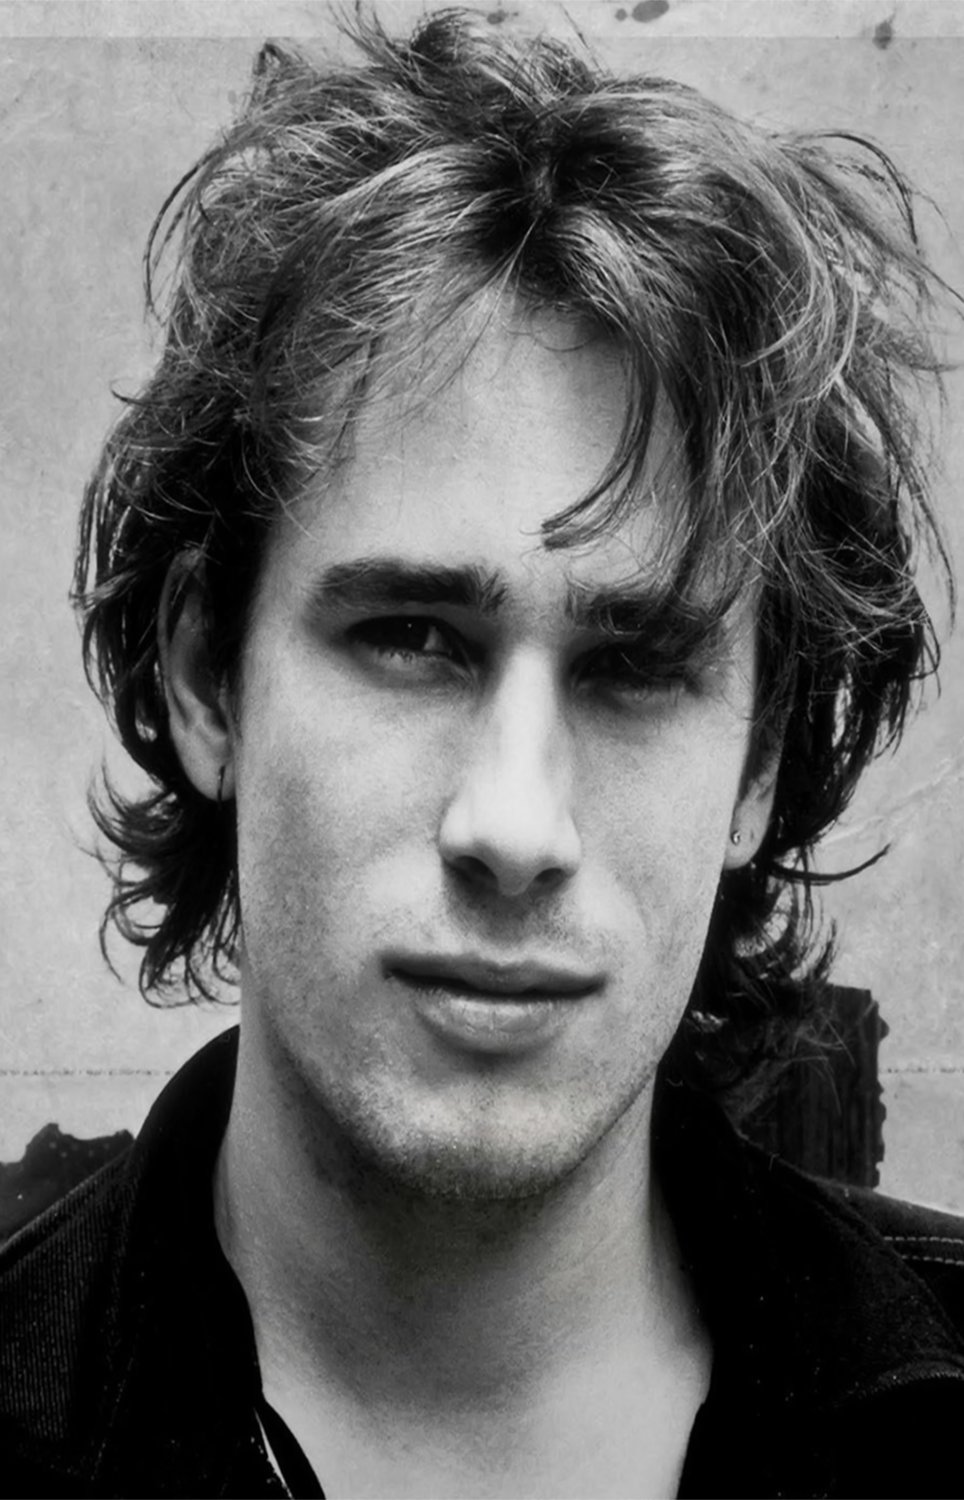 Jeff Buckley 13"x19" (32cm/49cm) Polyester Fabric Poster